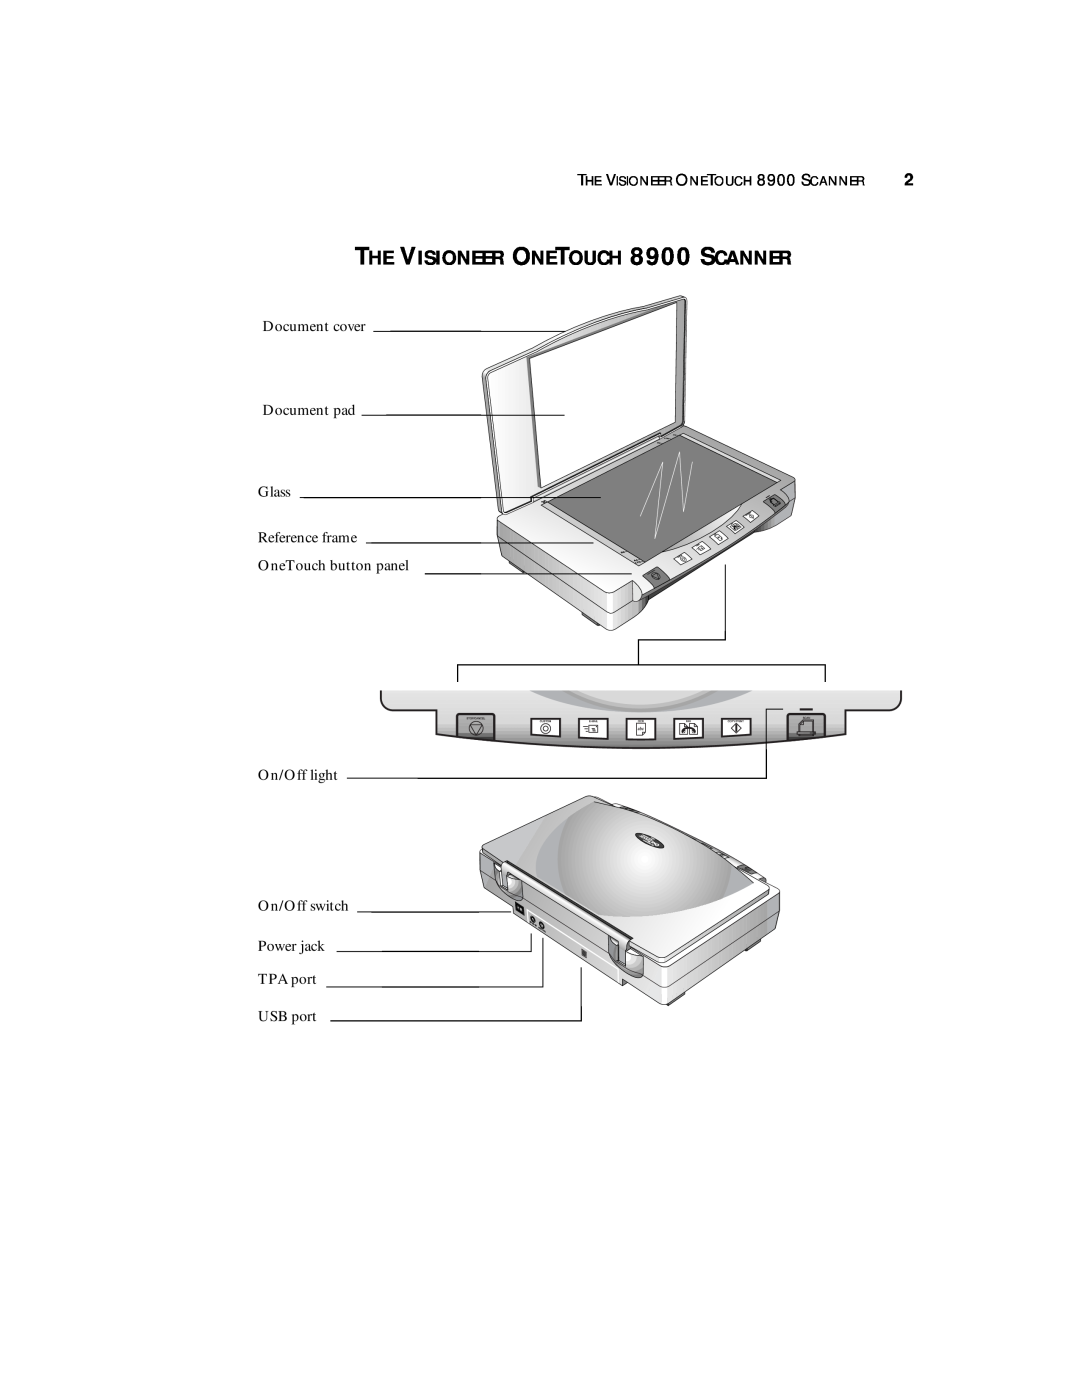 Visioneer manual THE VISIONEER ONETOUCH 8900 SCANNER, Document cover Document pad Glass Reference frame, USB port 